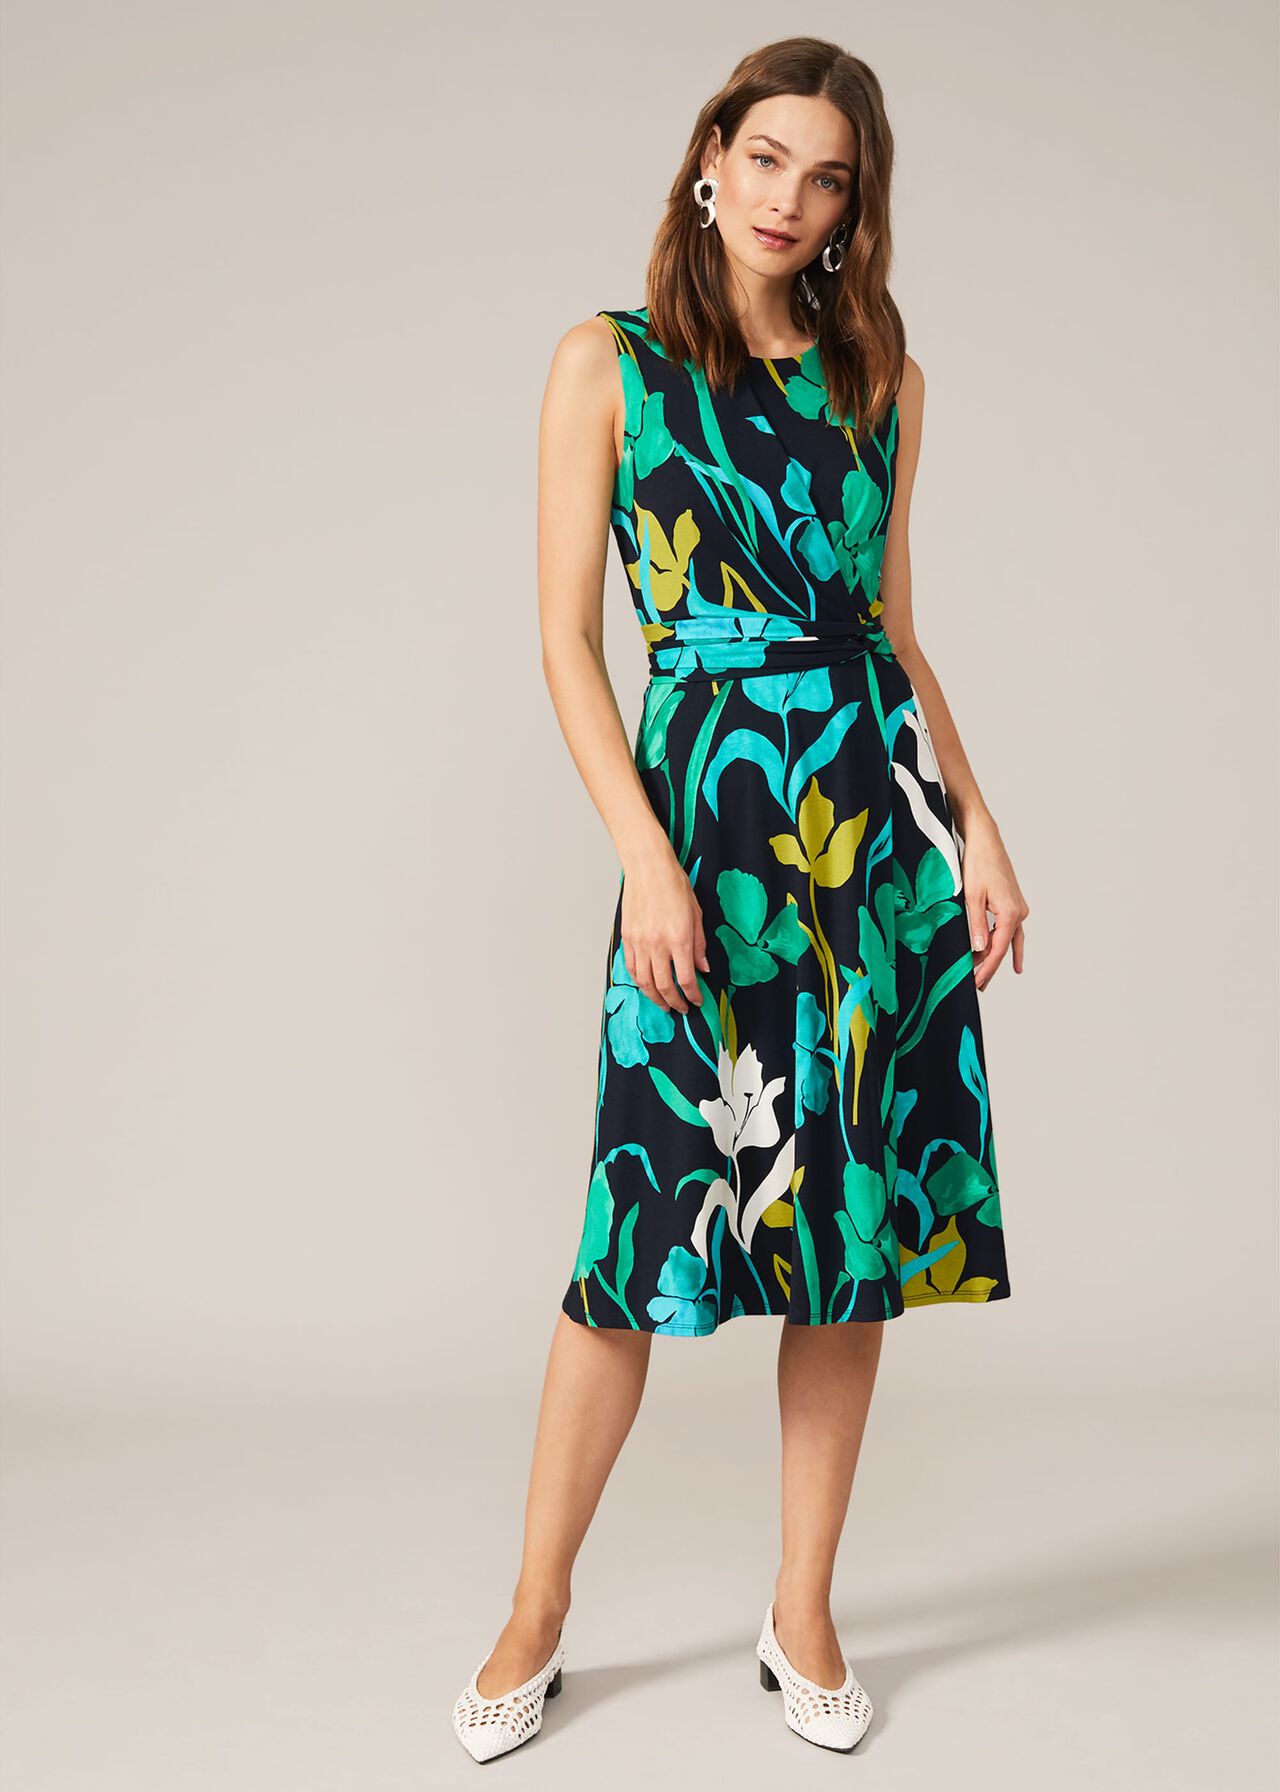 Catalina Floral Dress | Phase Eight